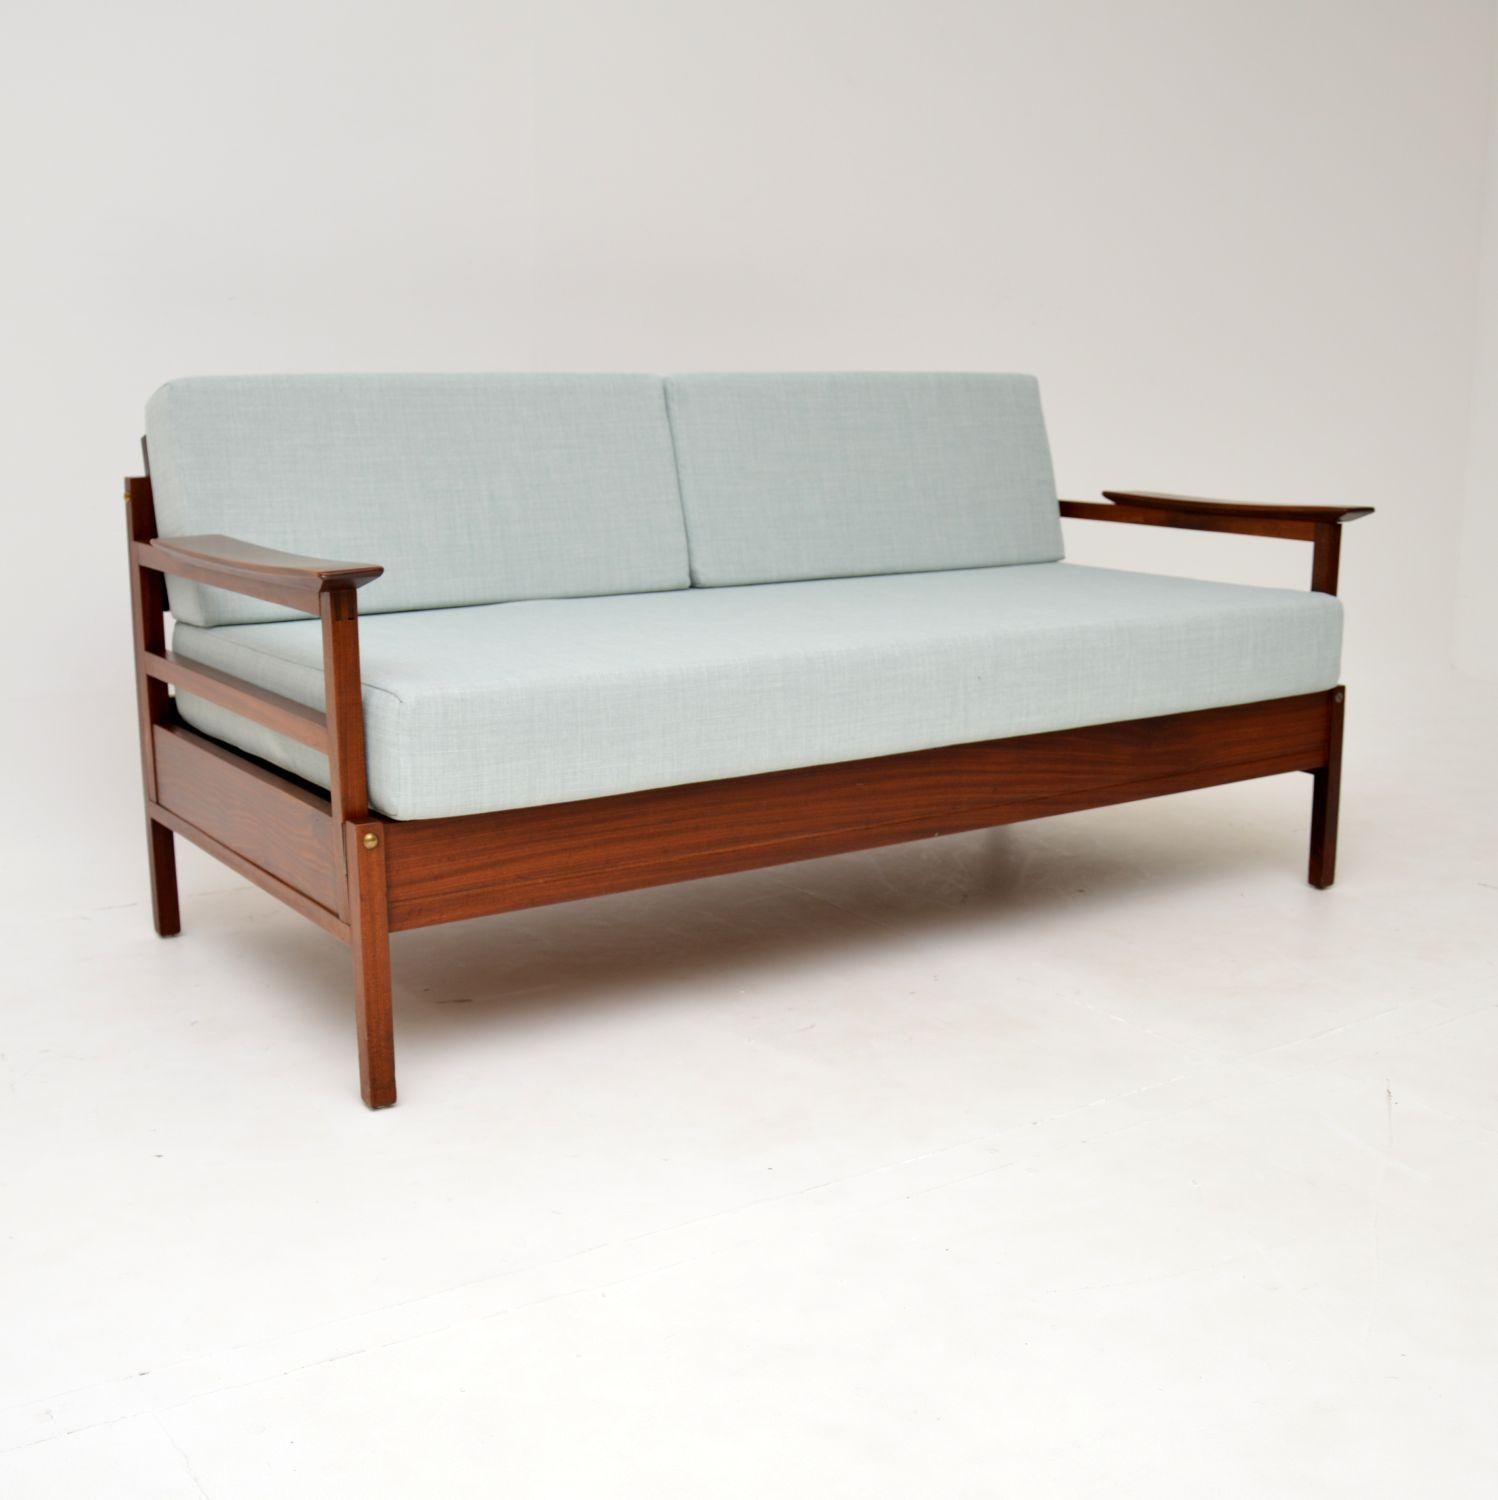 A stylish and very rare vintage ‘Gambit’ sofa bed by Guy Rogers. This was made in England during the 1960’s.

The frame is solid wood, which has gorgeous grain patterns and a beautiful, rich colour. The cushions have been newly made and